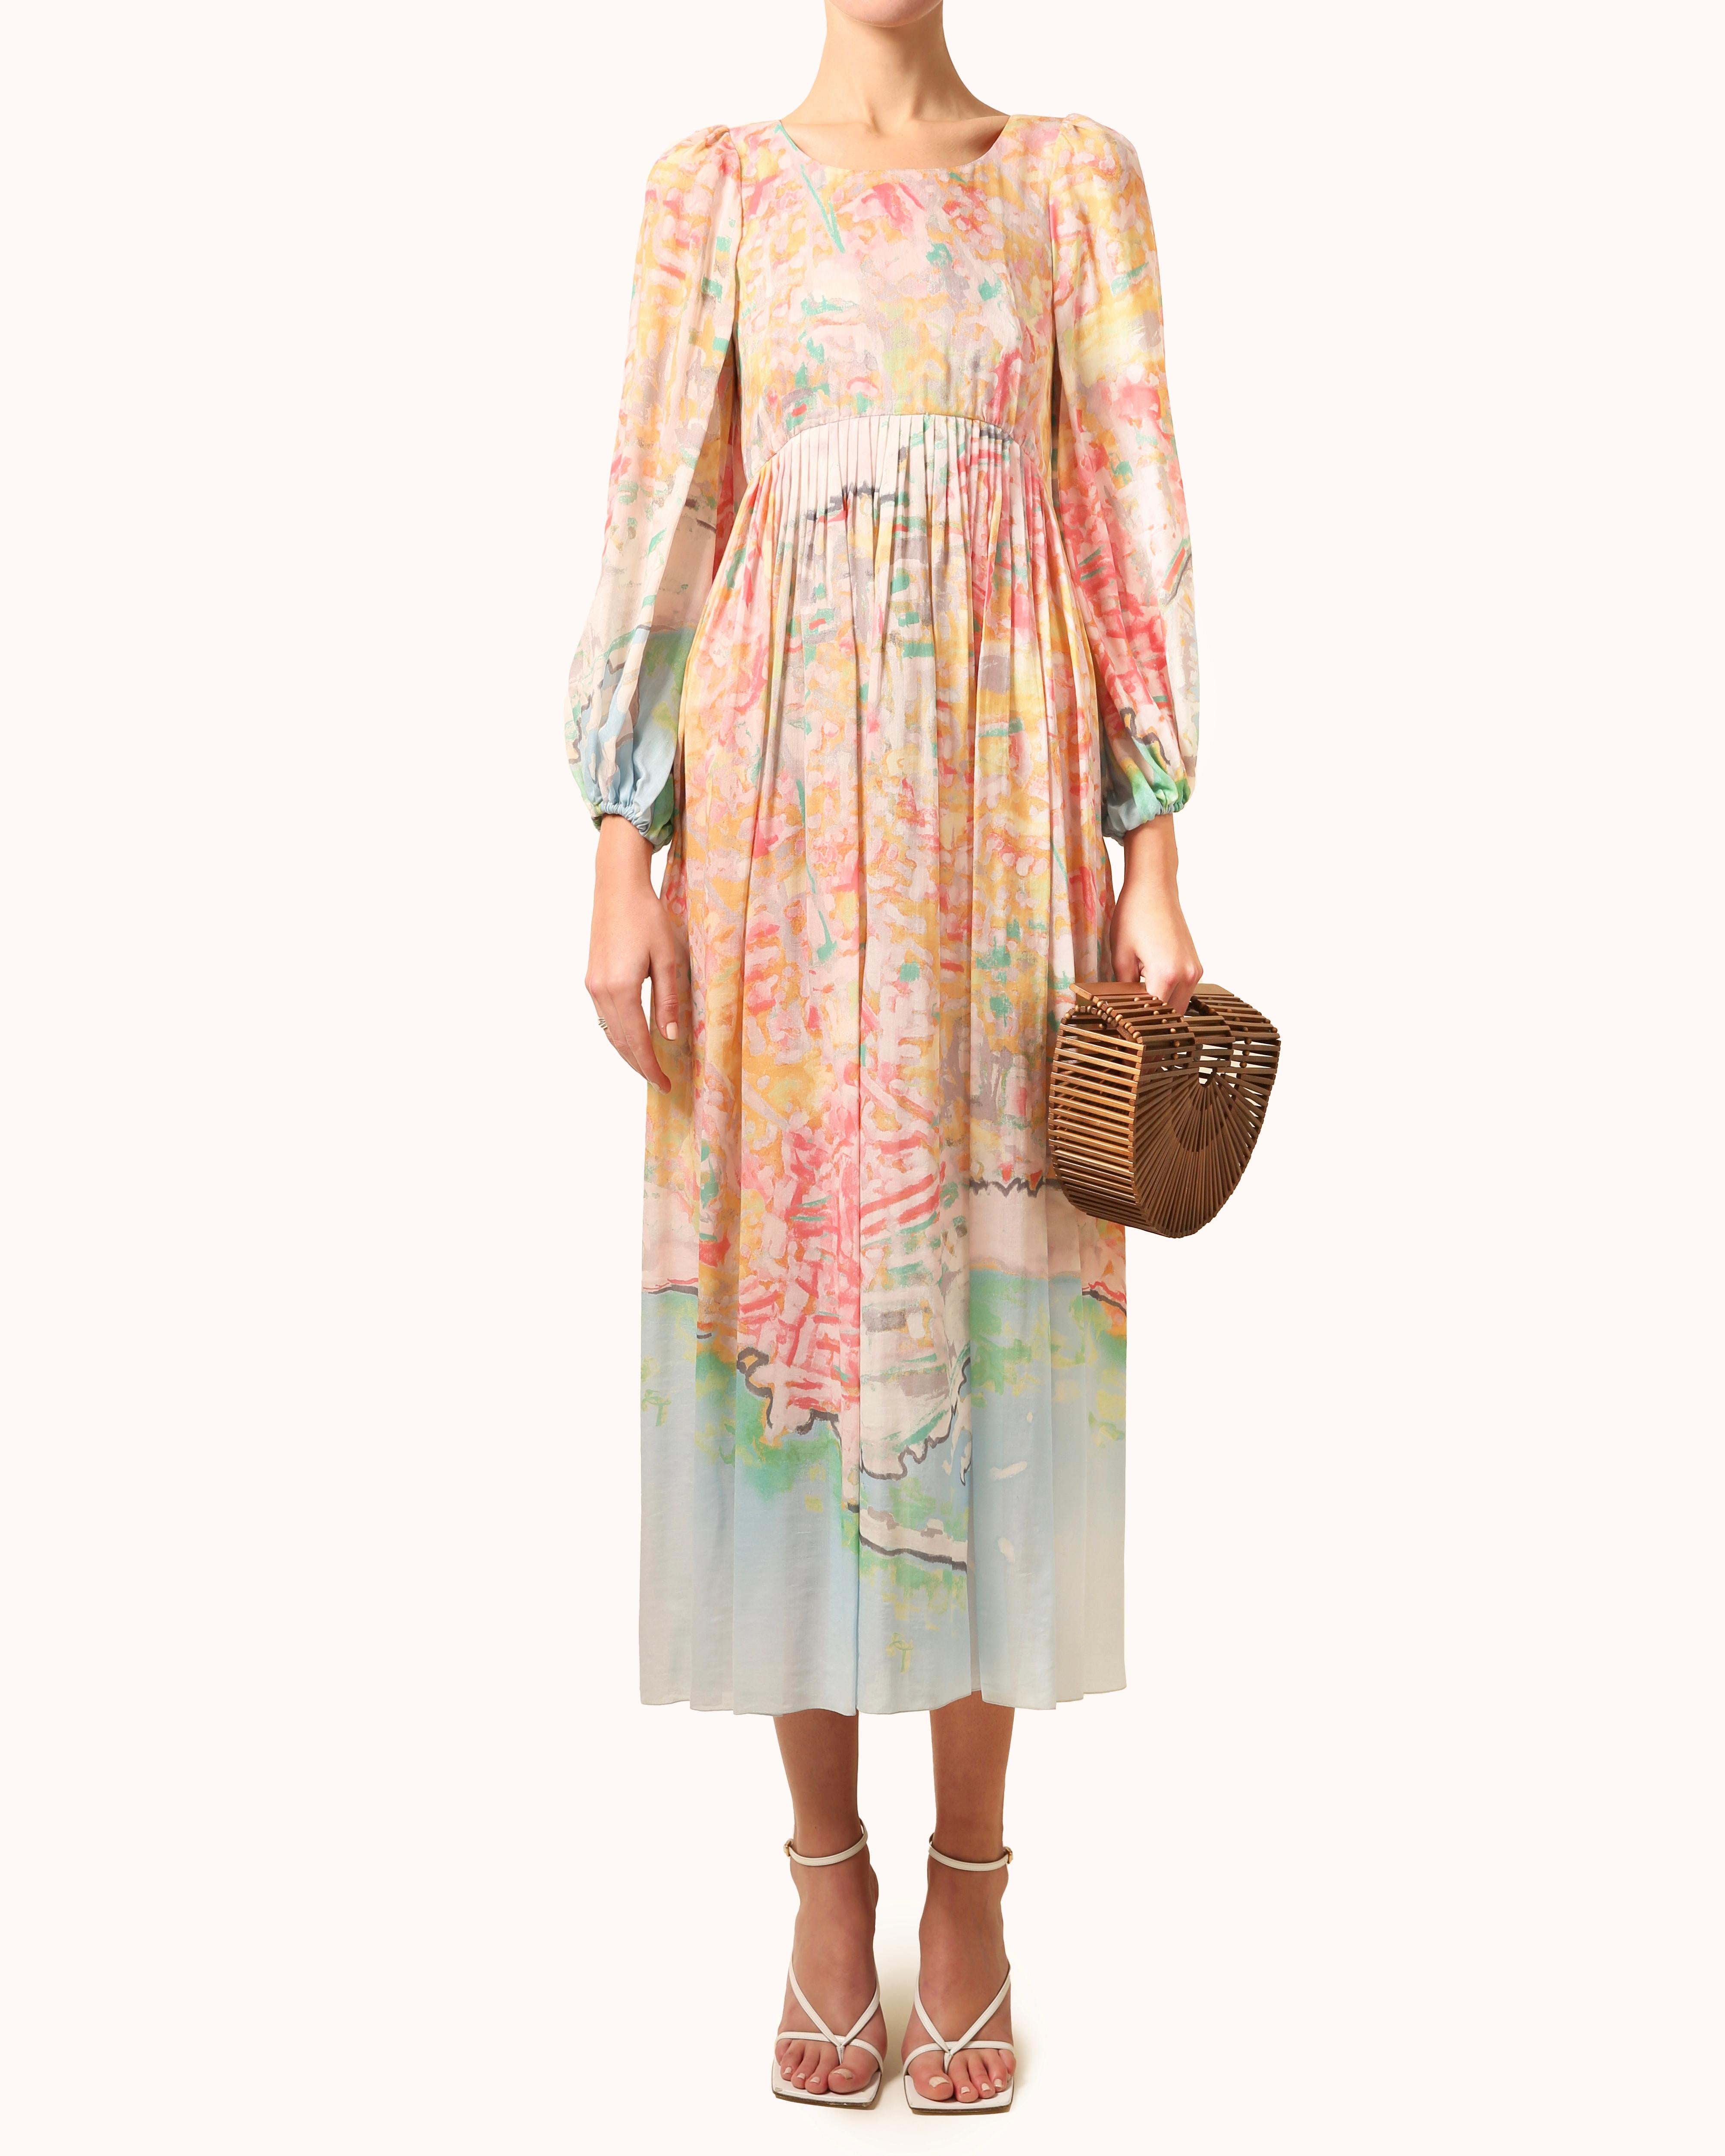 LOVE LALI VINTAGE

Chanel Resort 2011
Rare babydoll style midi length dress in a beautiful array of pastel colours
Abstract watercolour style print
Sleeves are ruched at the cuff creating a balloon effect
Free flowing skirt with pleat detail
Cinched